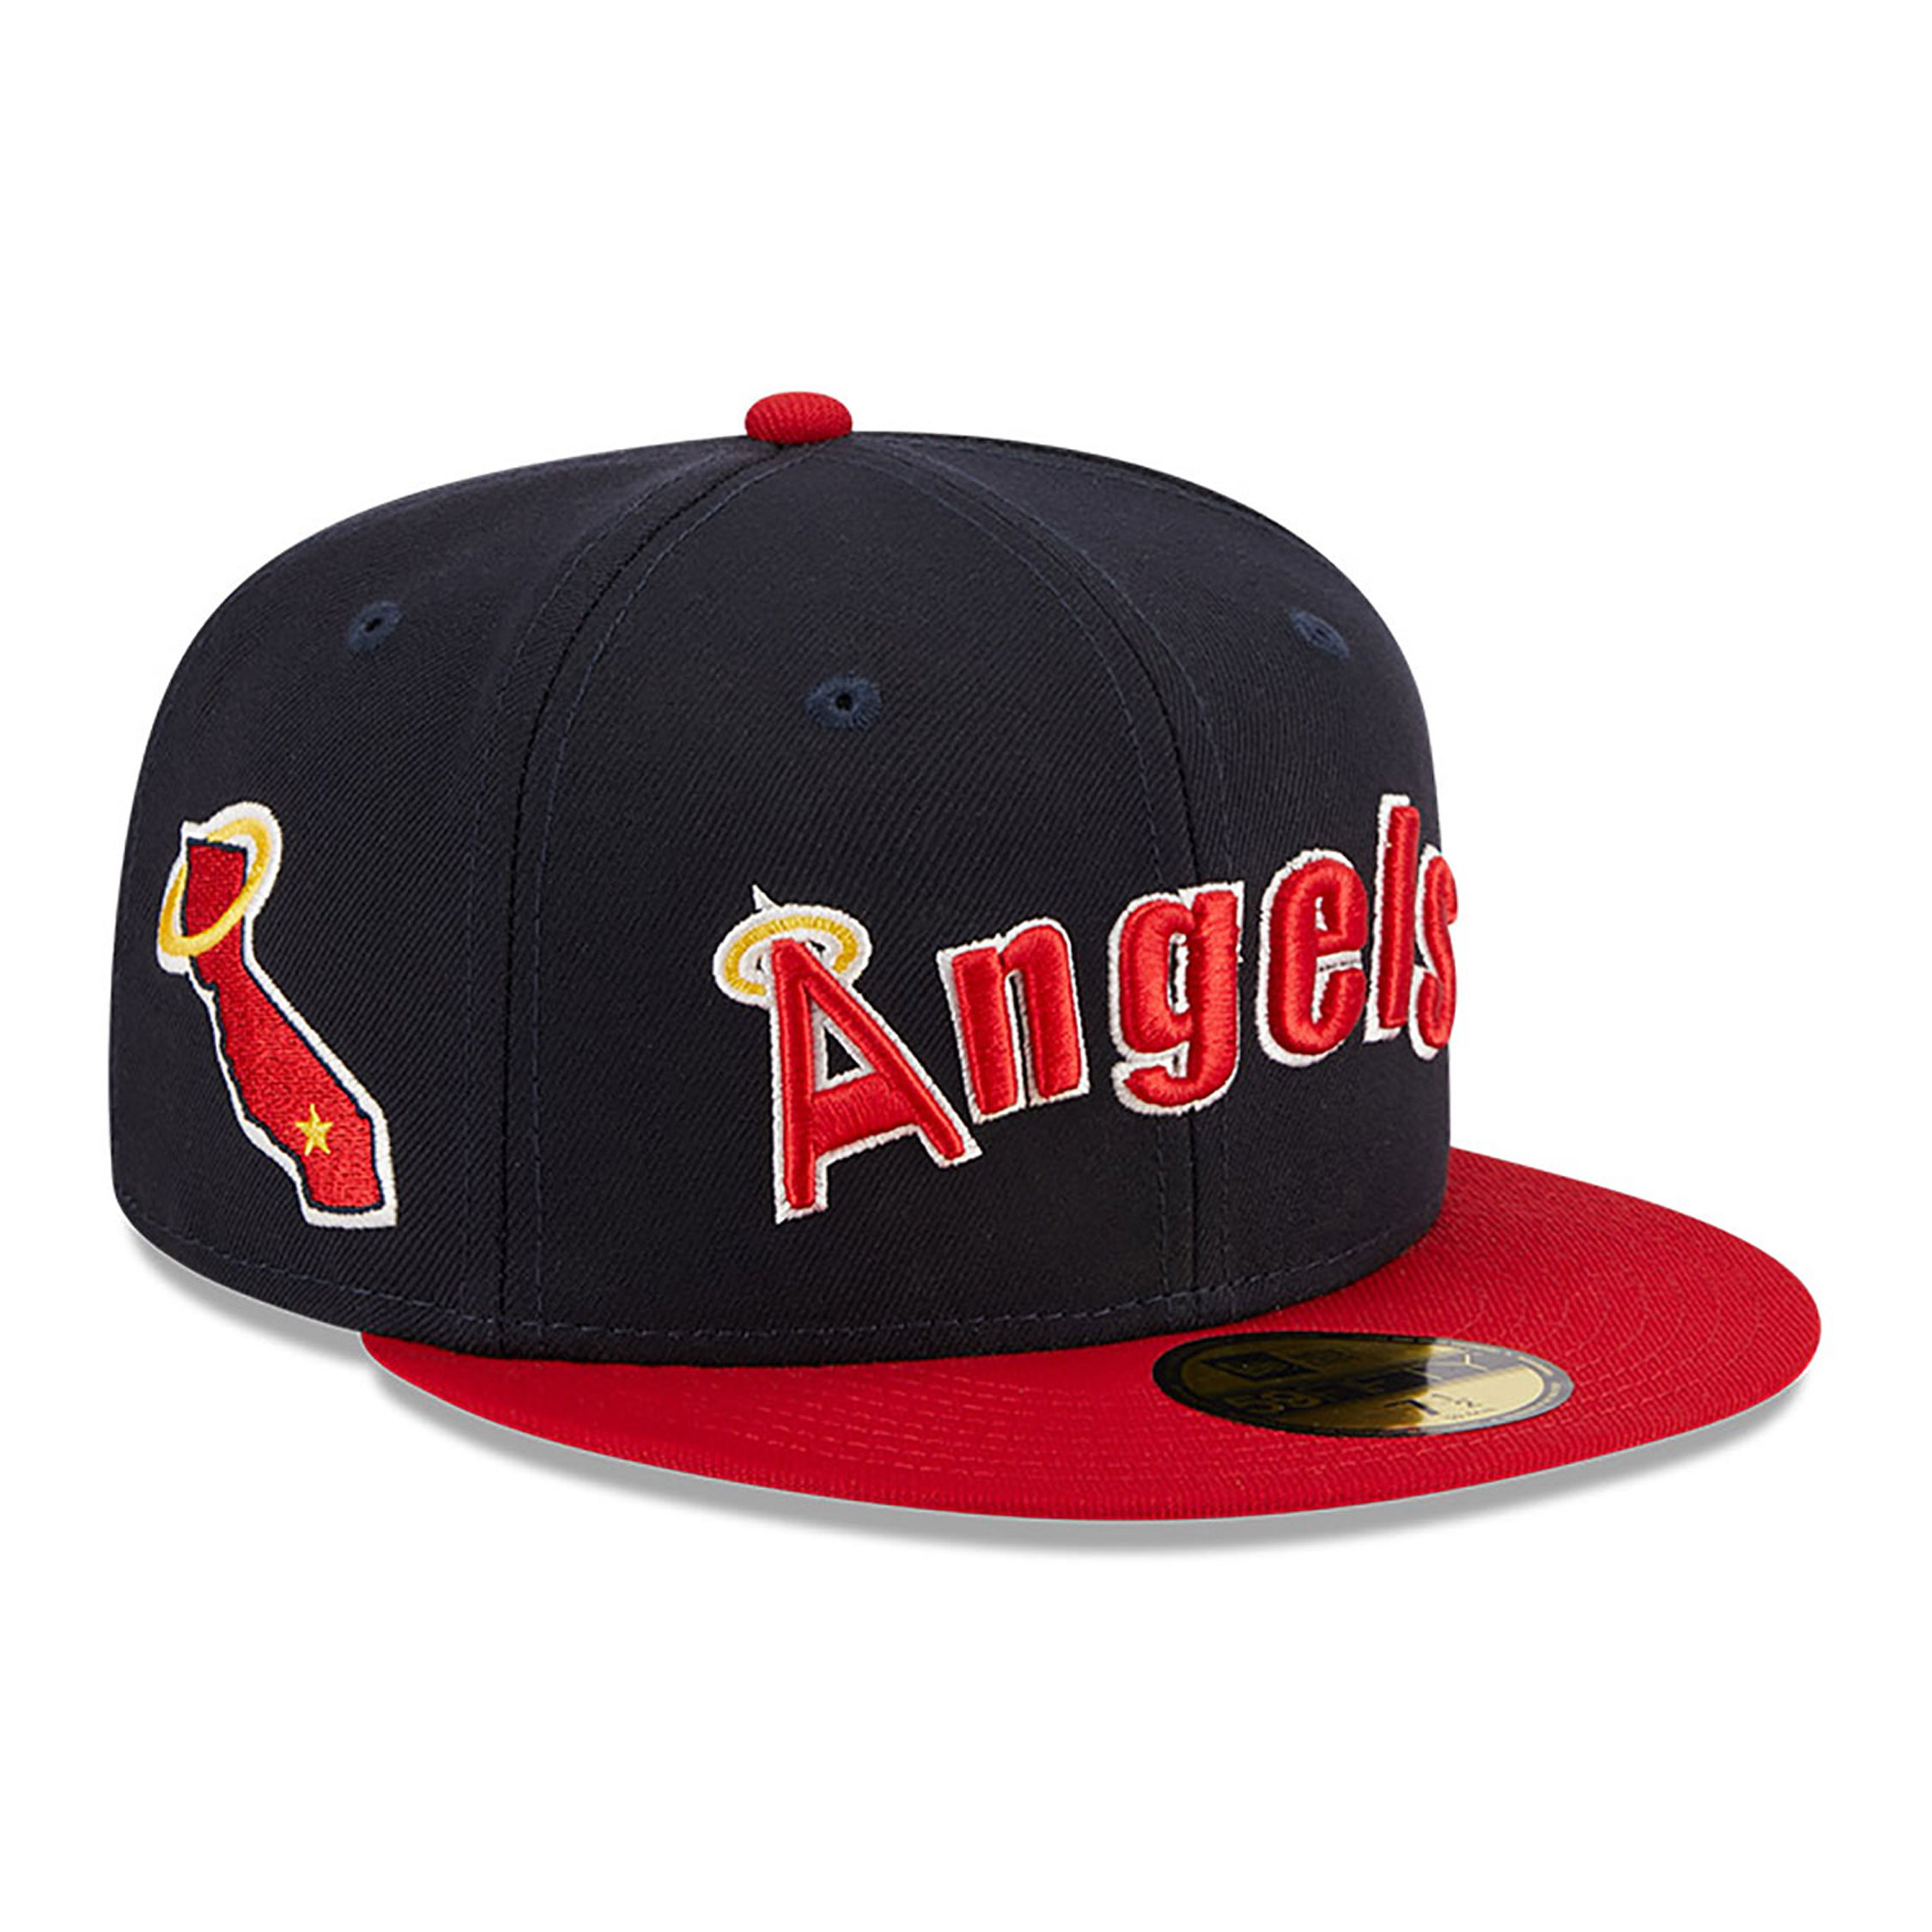 California Angels Retro Script Navy 59FIFTY Fitted Cap